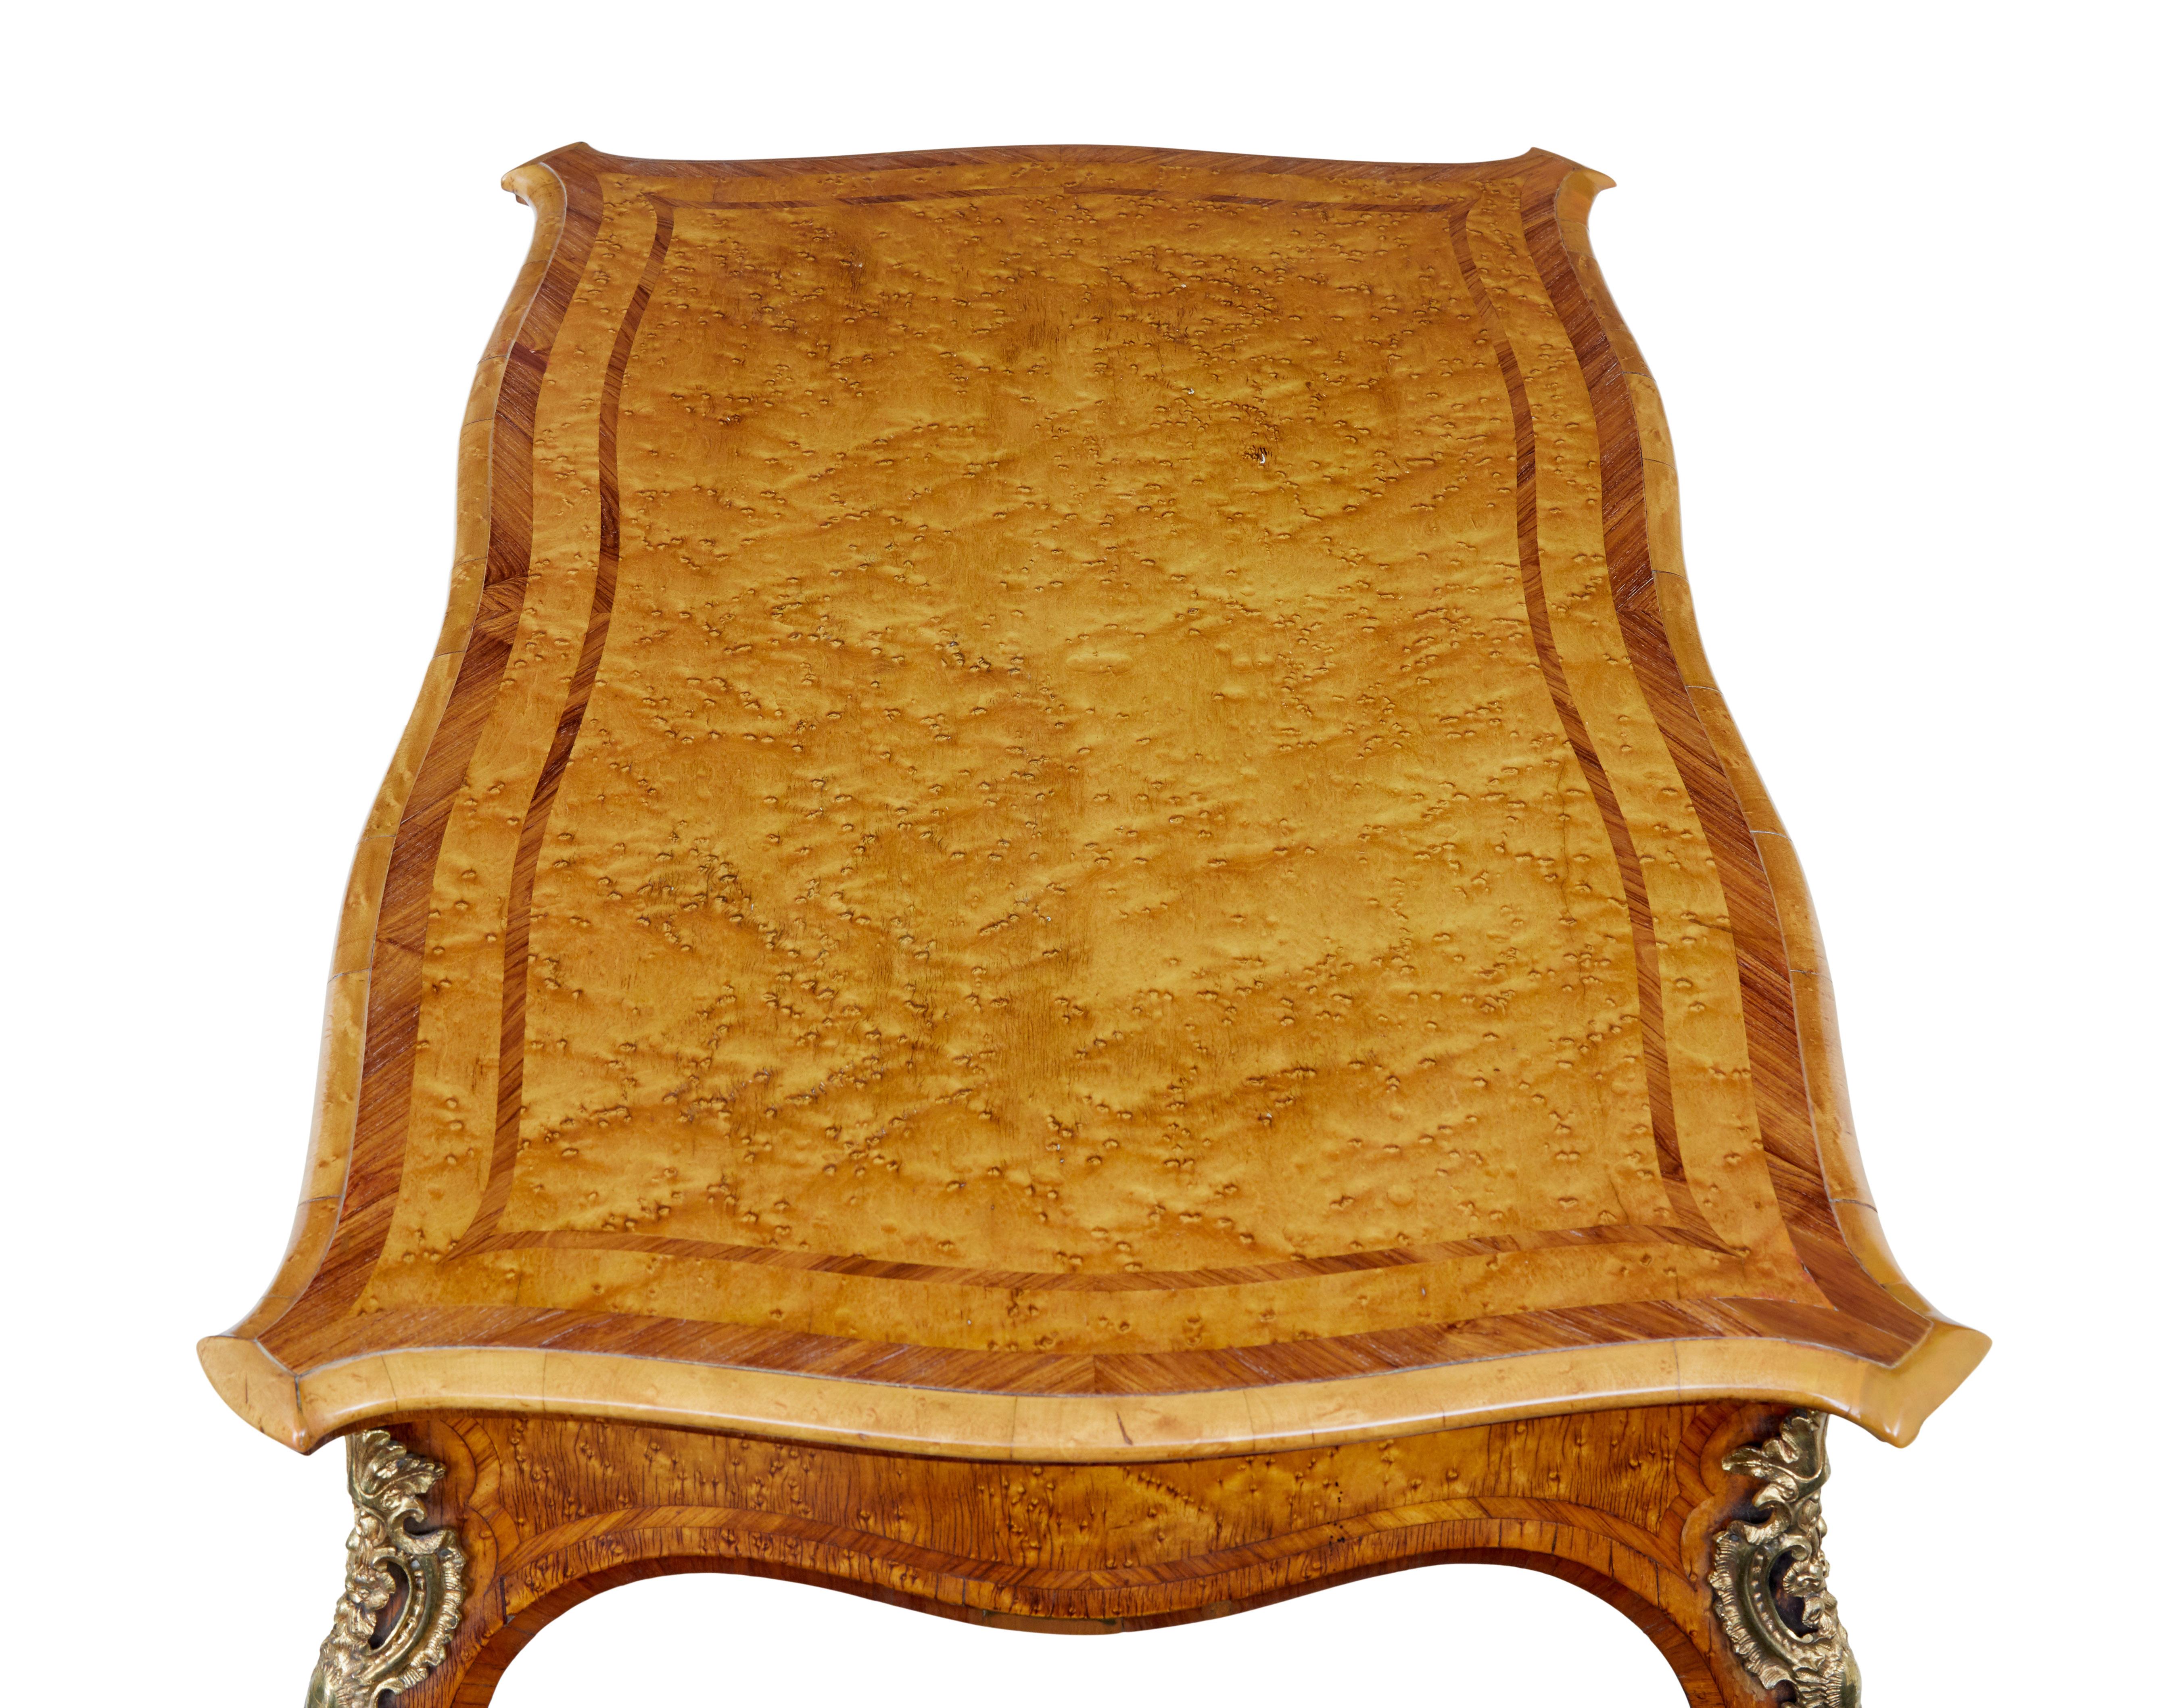 19th century Edwards and Roberts birds eye maple card table circa 1890.

Stunning quality card/game's table by Edwards and Roberts, with makers plaque on the underside.

Unusually for Edwards and Roberts this is made in birds eye maple, so can